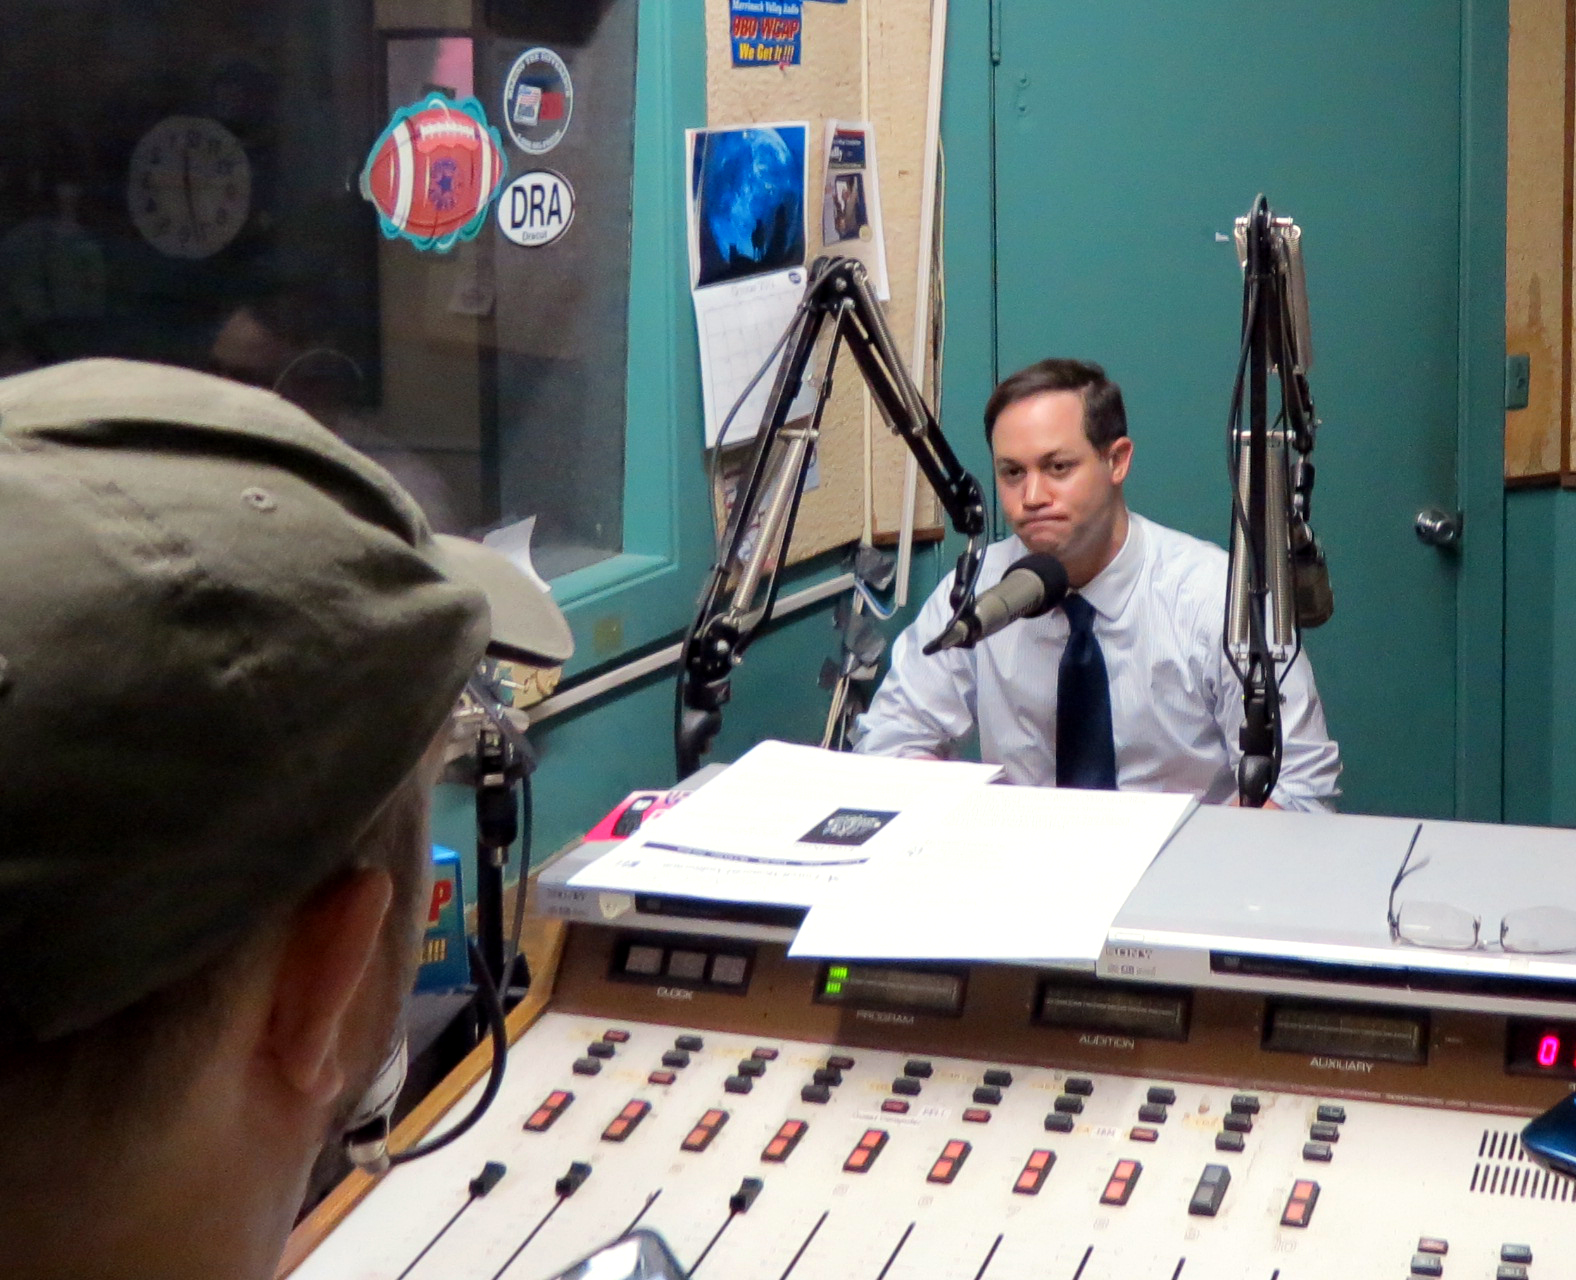 Rep. Adams Stumps on Air While Finegold a No-Show in WCAP Debate